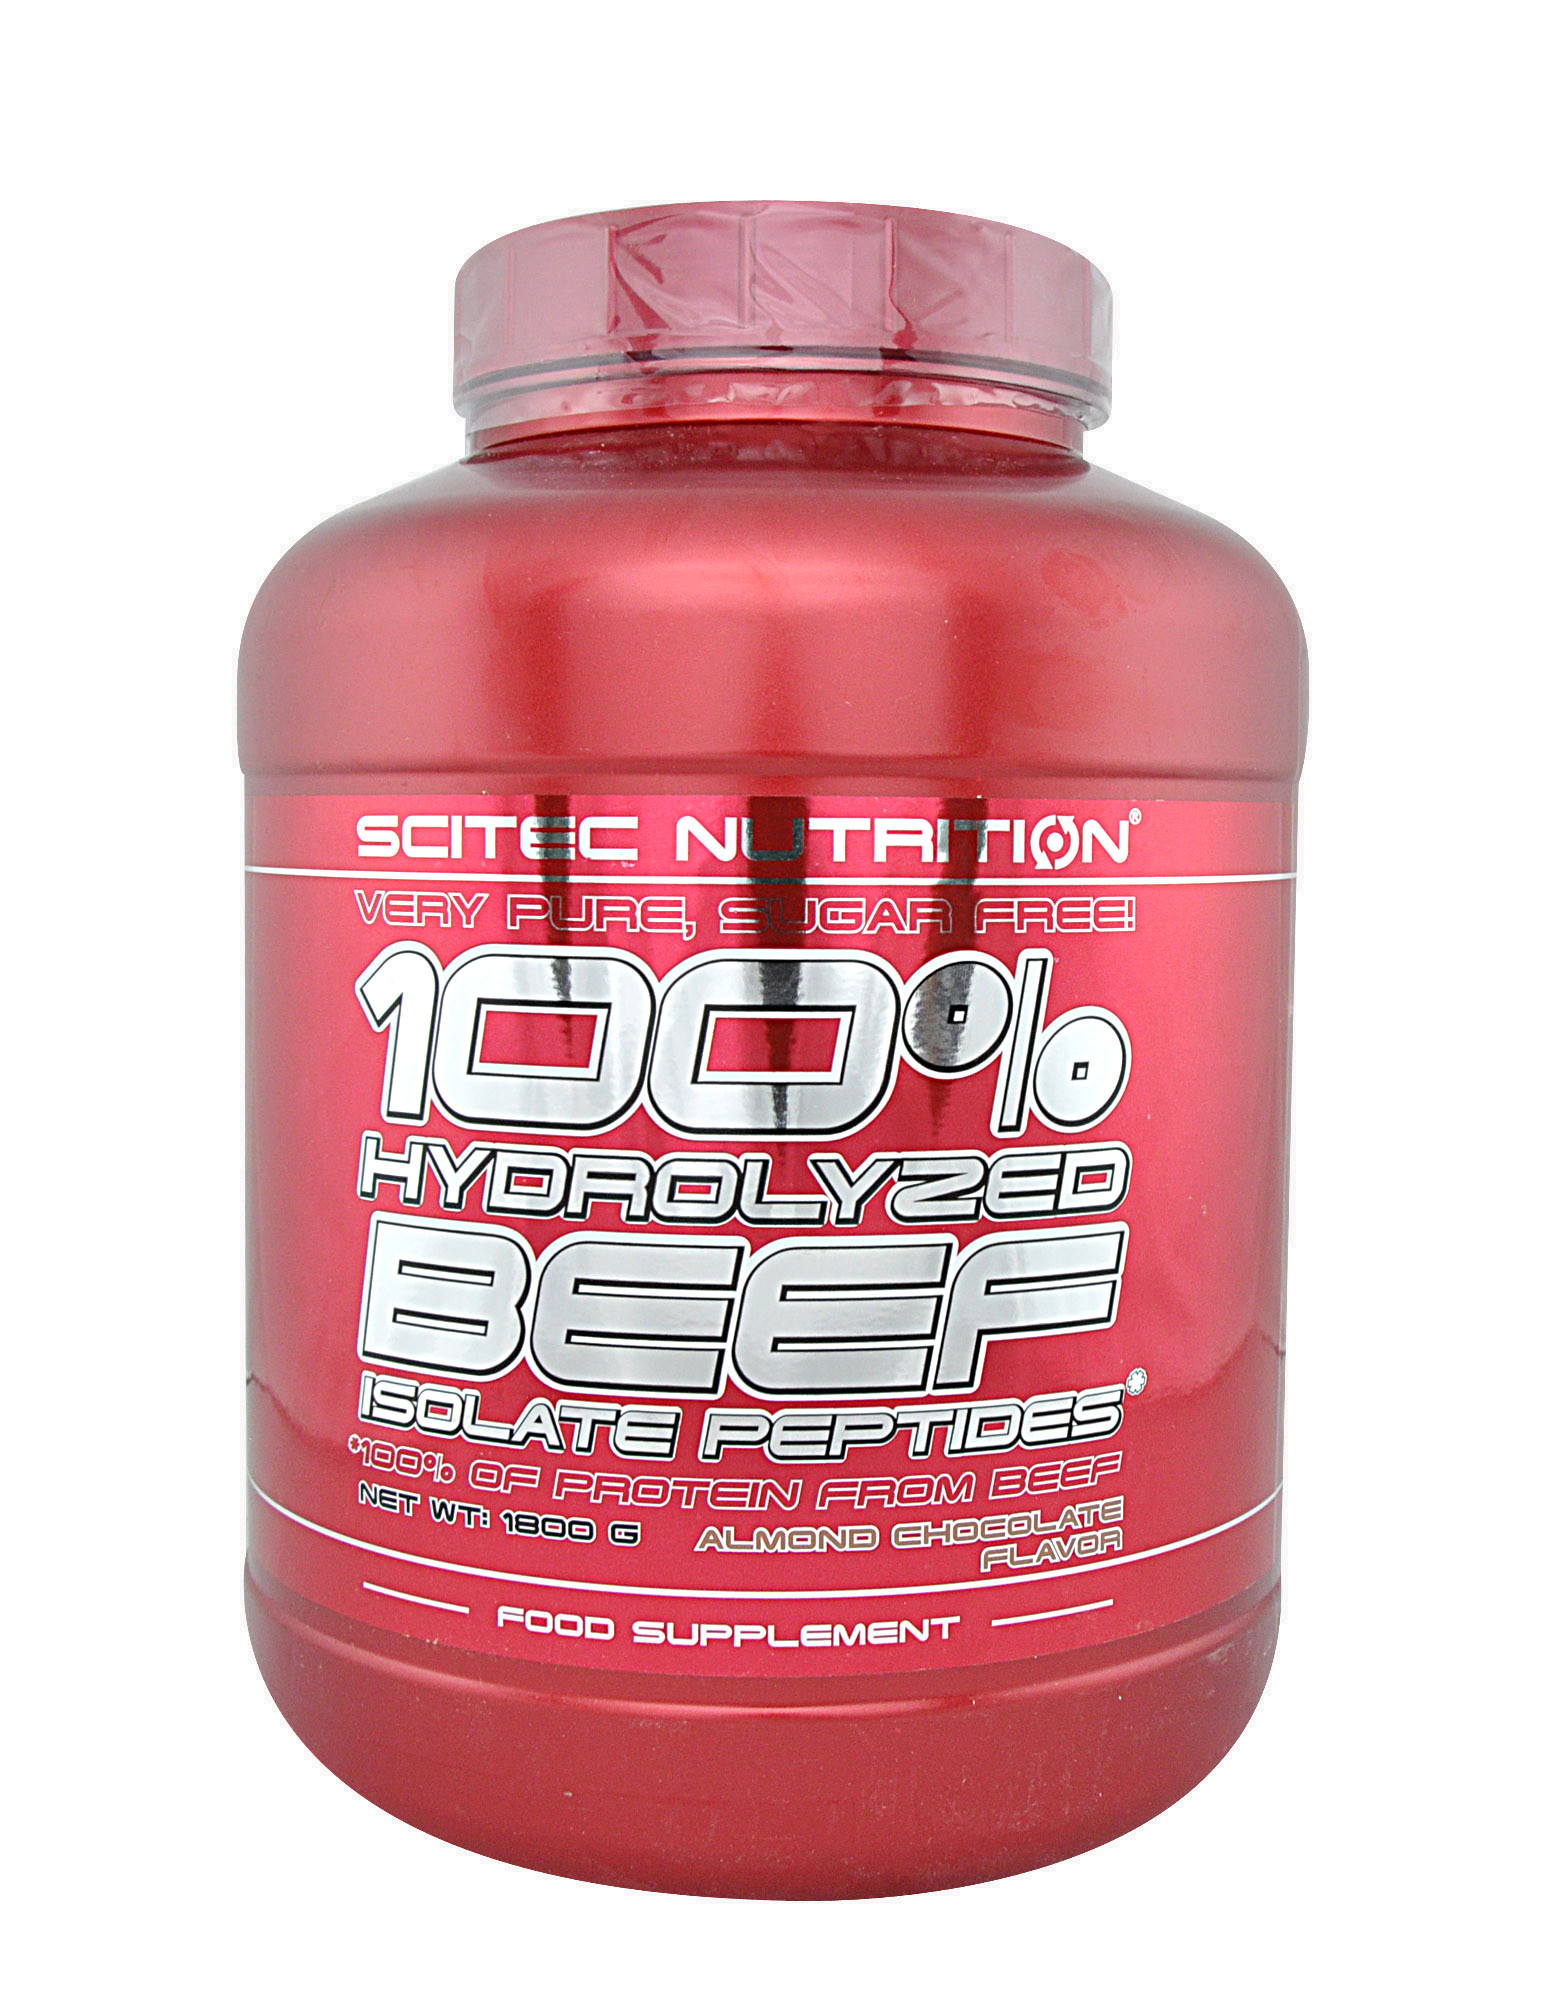 Scitec nutrition 100. Scitec Nutrition протеин. Протеин Scitec Nutrition 100% hydrolyzed Whey Protein. Scitec Nutrition isolate. Scitec 100% hydrolyzed Beef isolate Peptides 900 г.